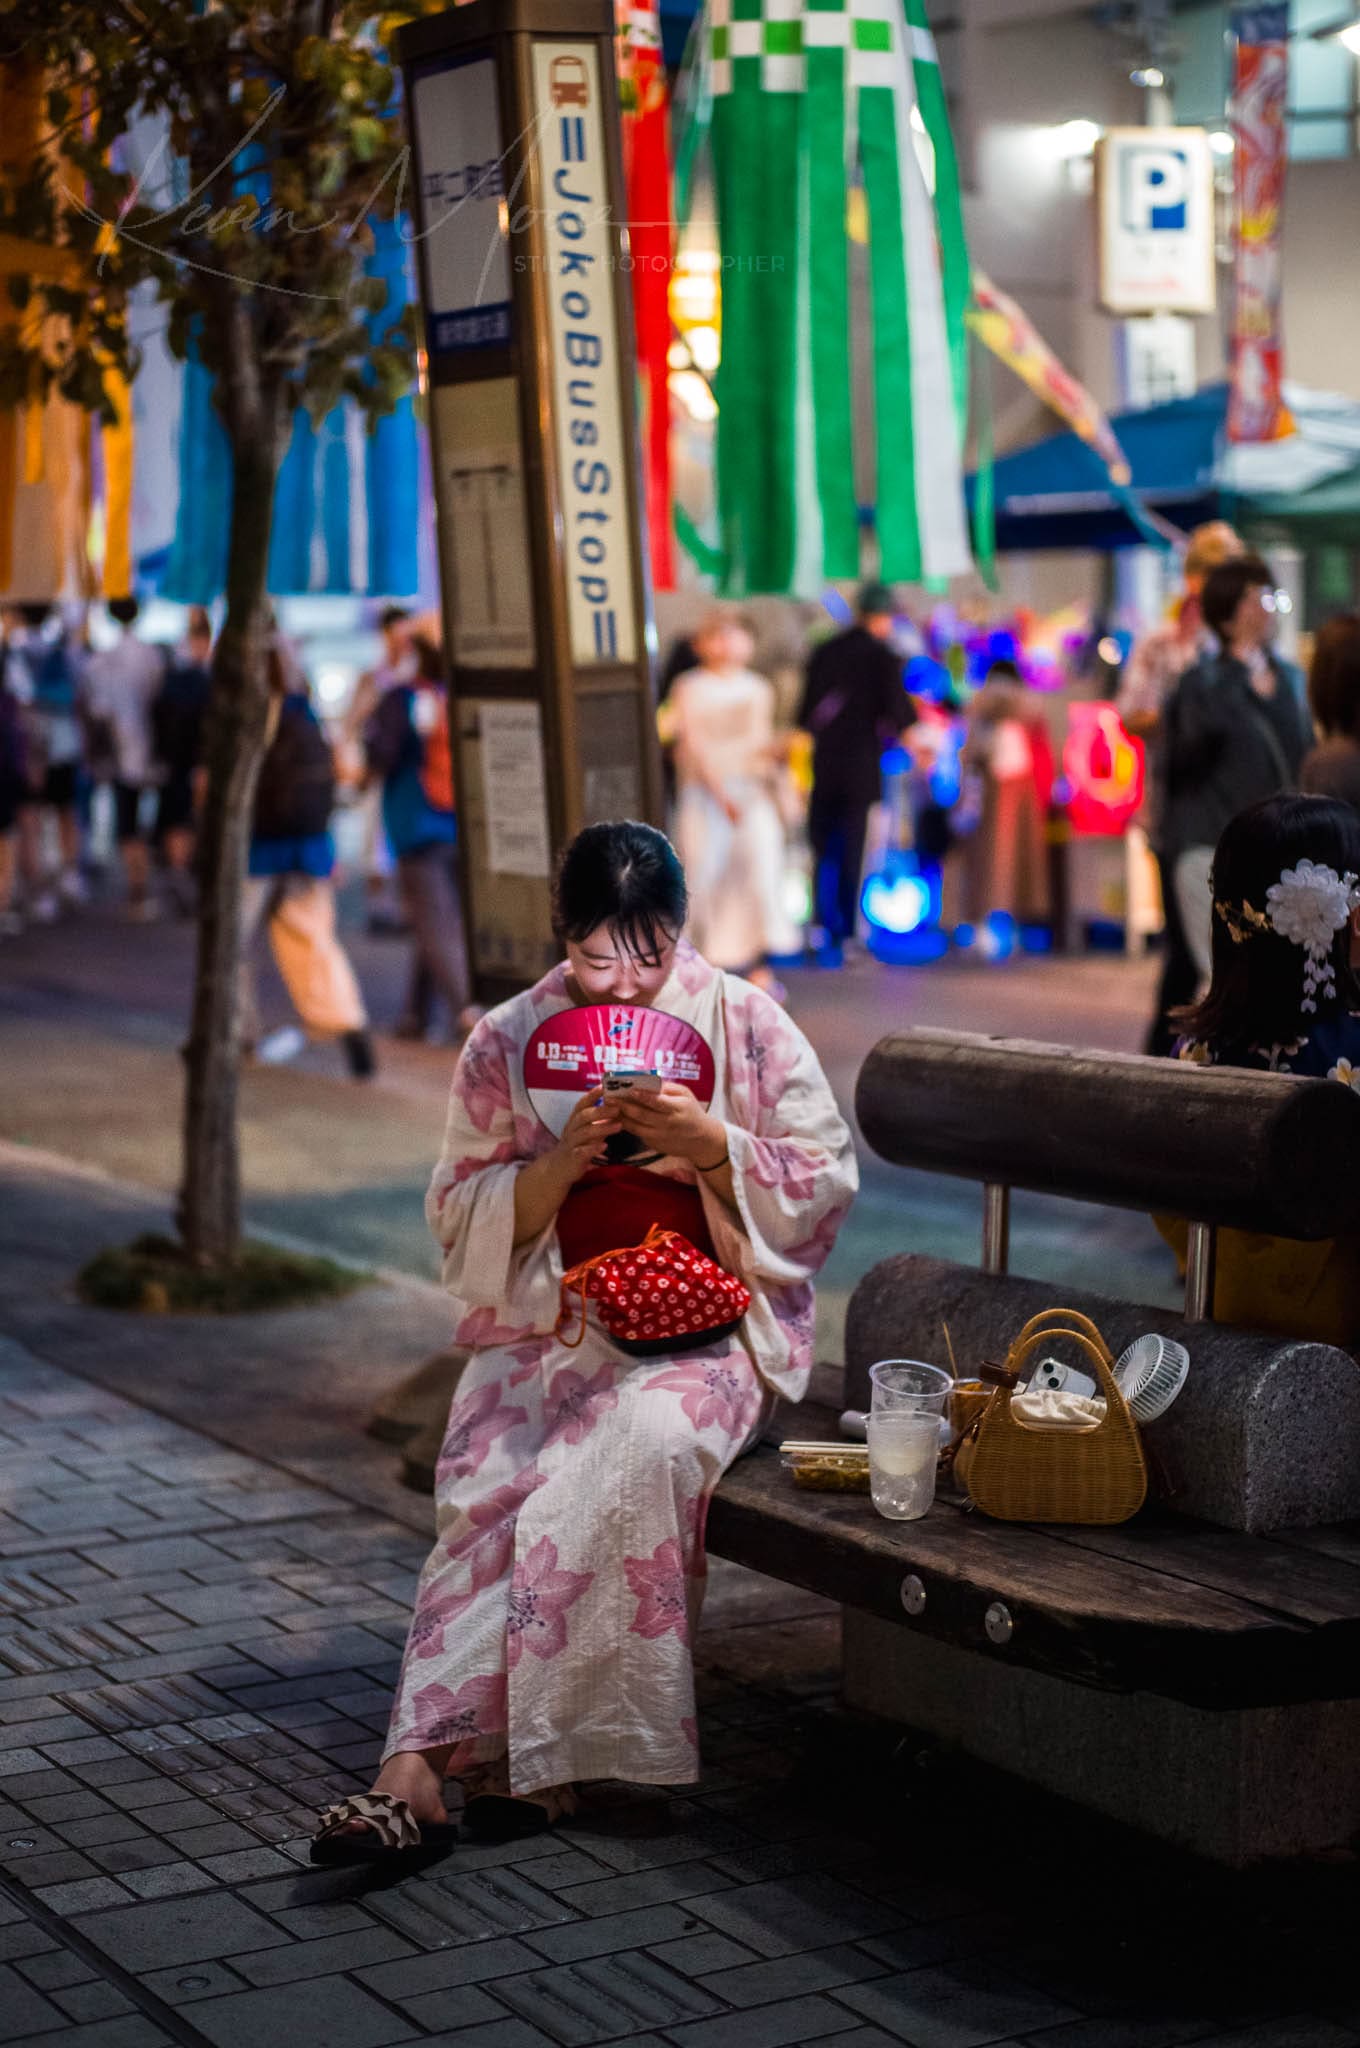 Woman in kimono interacting with handheld device, blending traditional Japanese heritage with modern urban life.